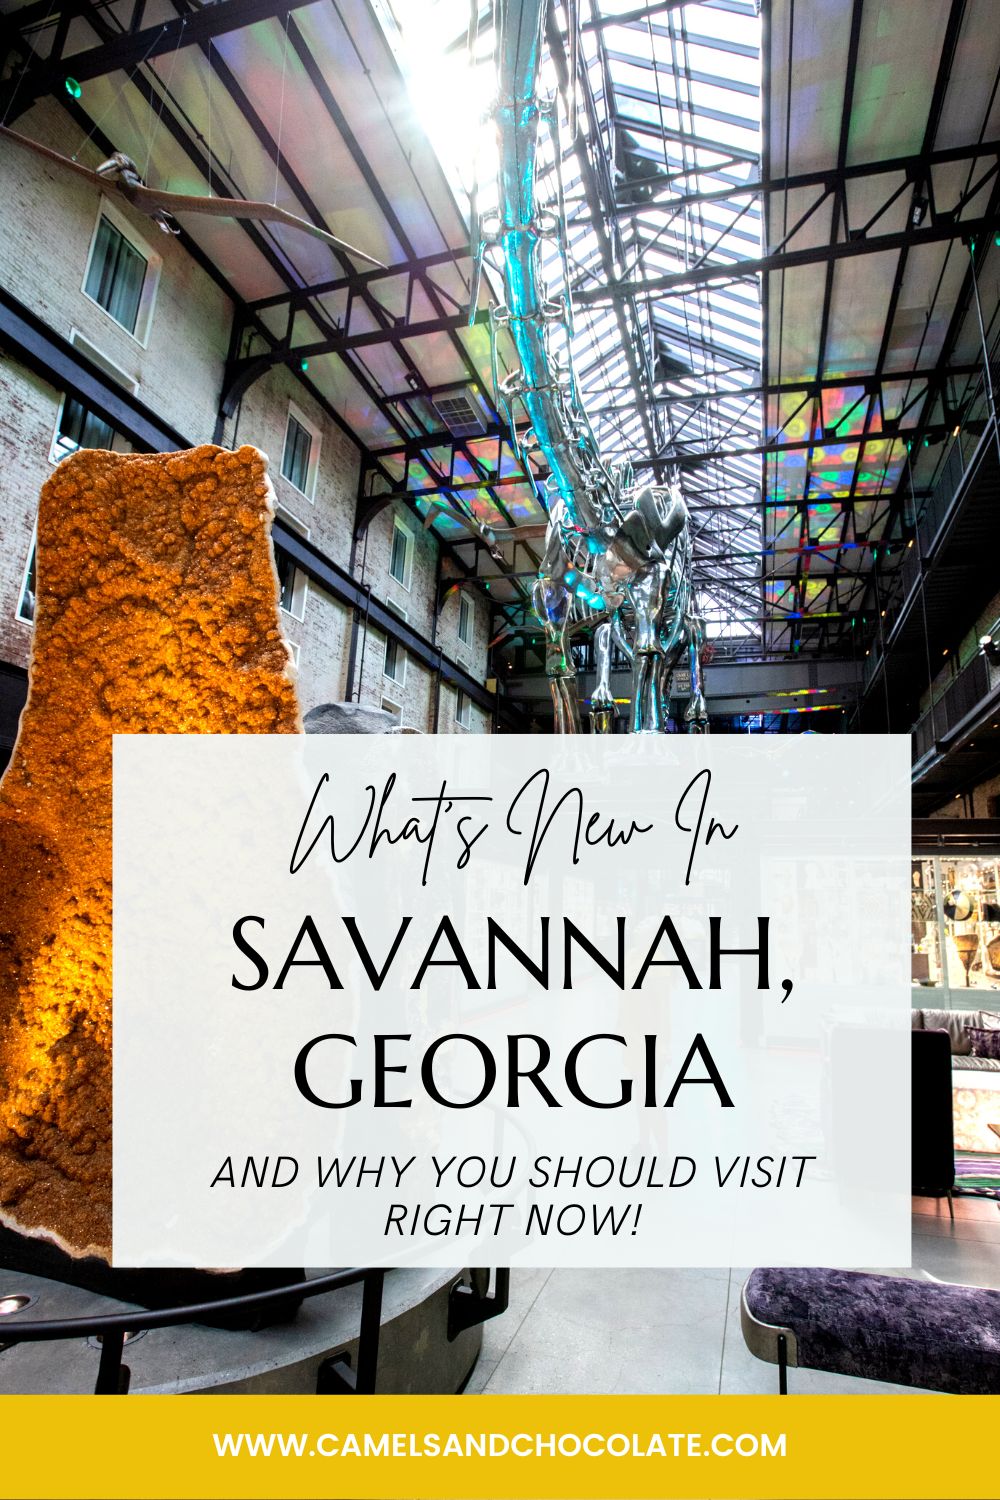 Why you should visit Savannah right now